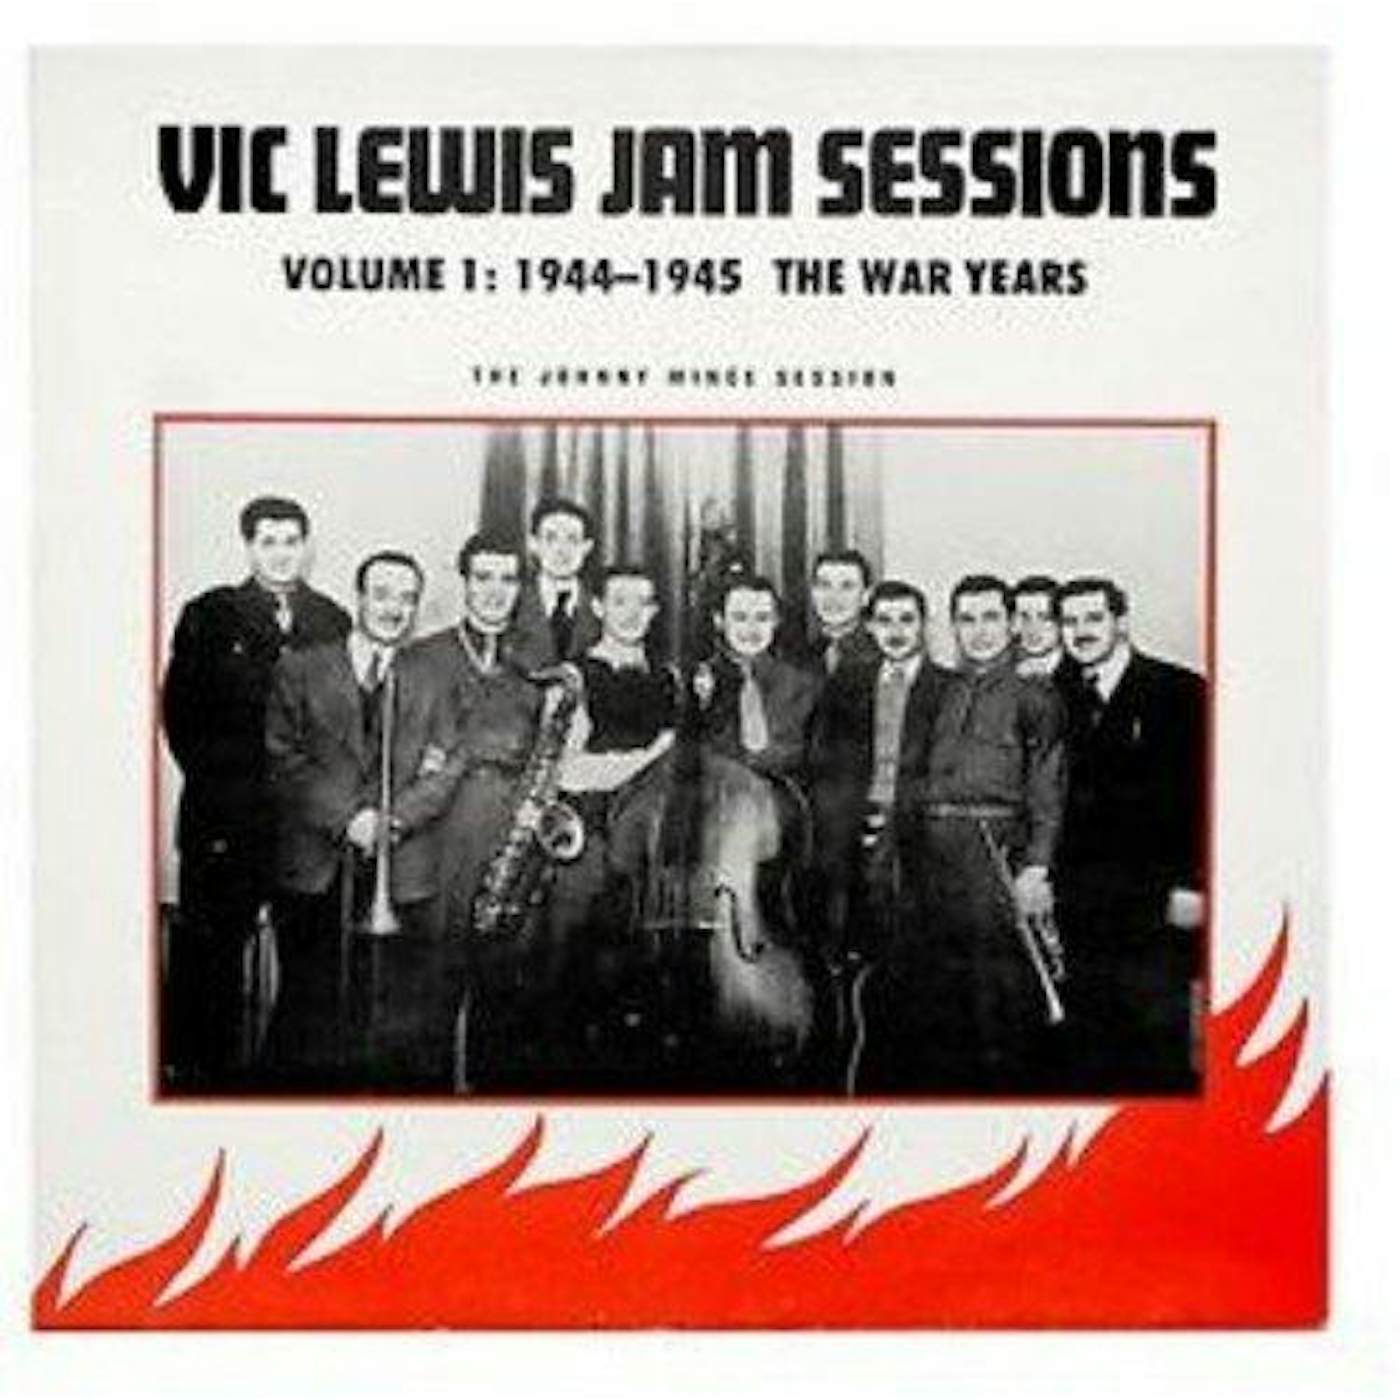 Vic Lewis JAM SESSIONS VOLUME 1: 1944-1945 THE WAR YEARS Vinyl Record